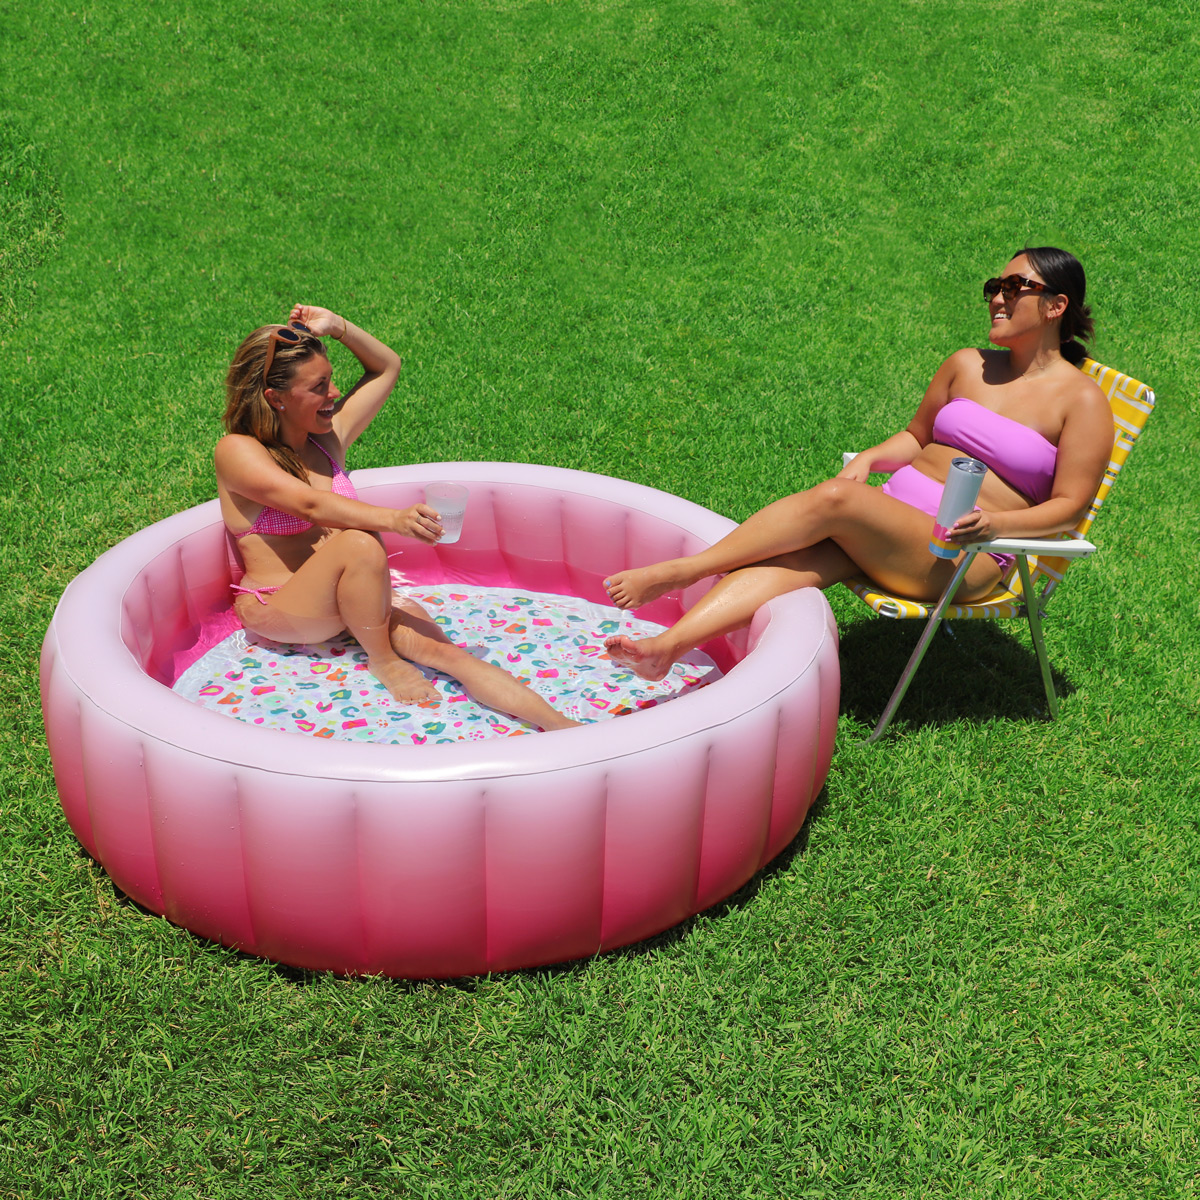 Packed Party Luxe Pink Ombre 59” Round Soft-Sided 3-Ring Inflatable Swimming Pool - image 3 of 5